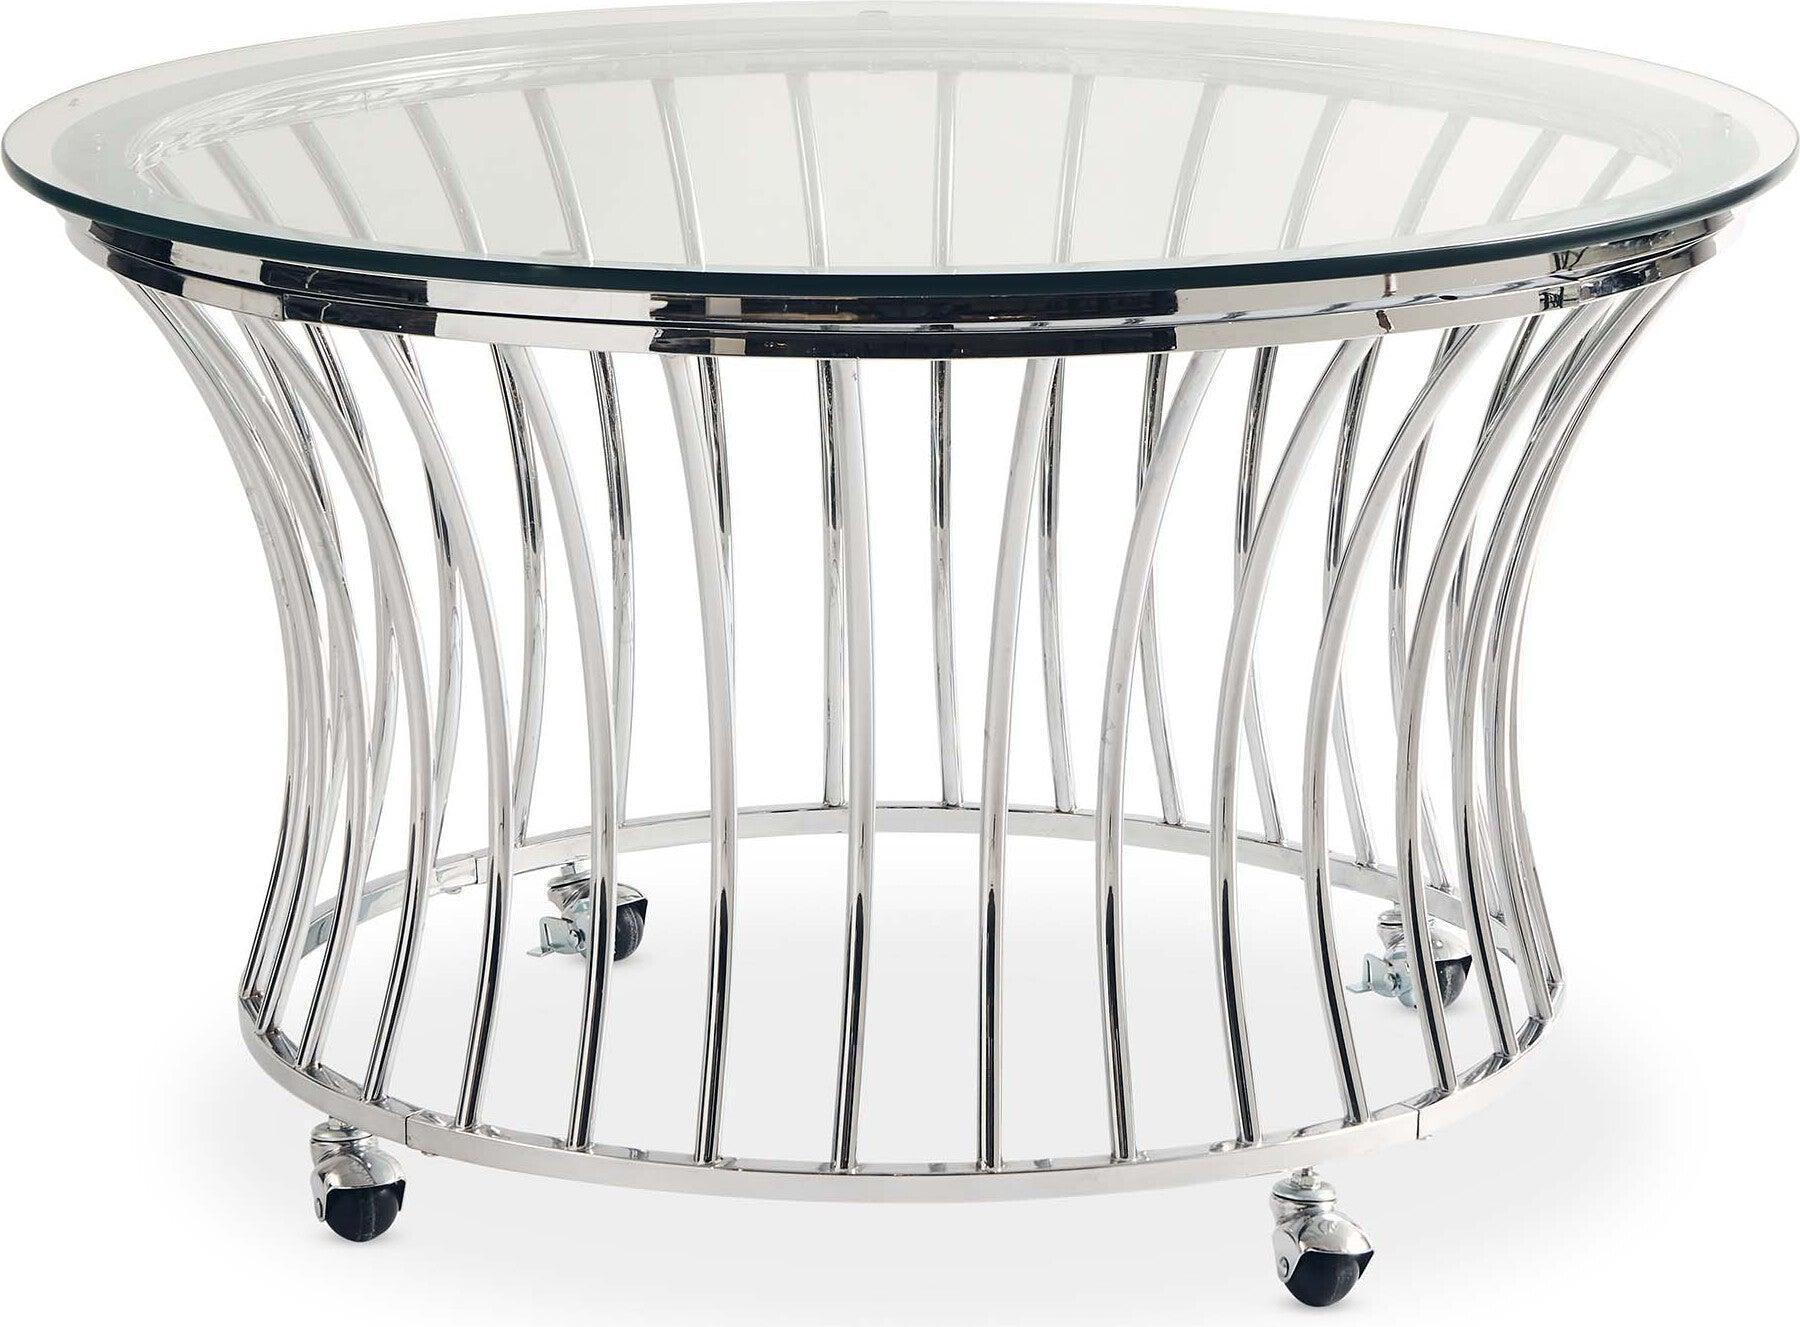 Elements Coffee Tables - Astoria Round Coffee Table Chrome